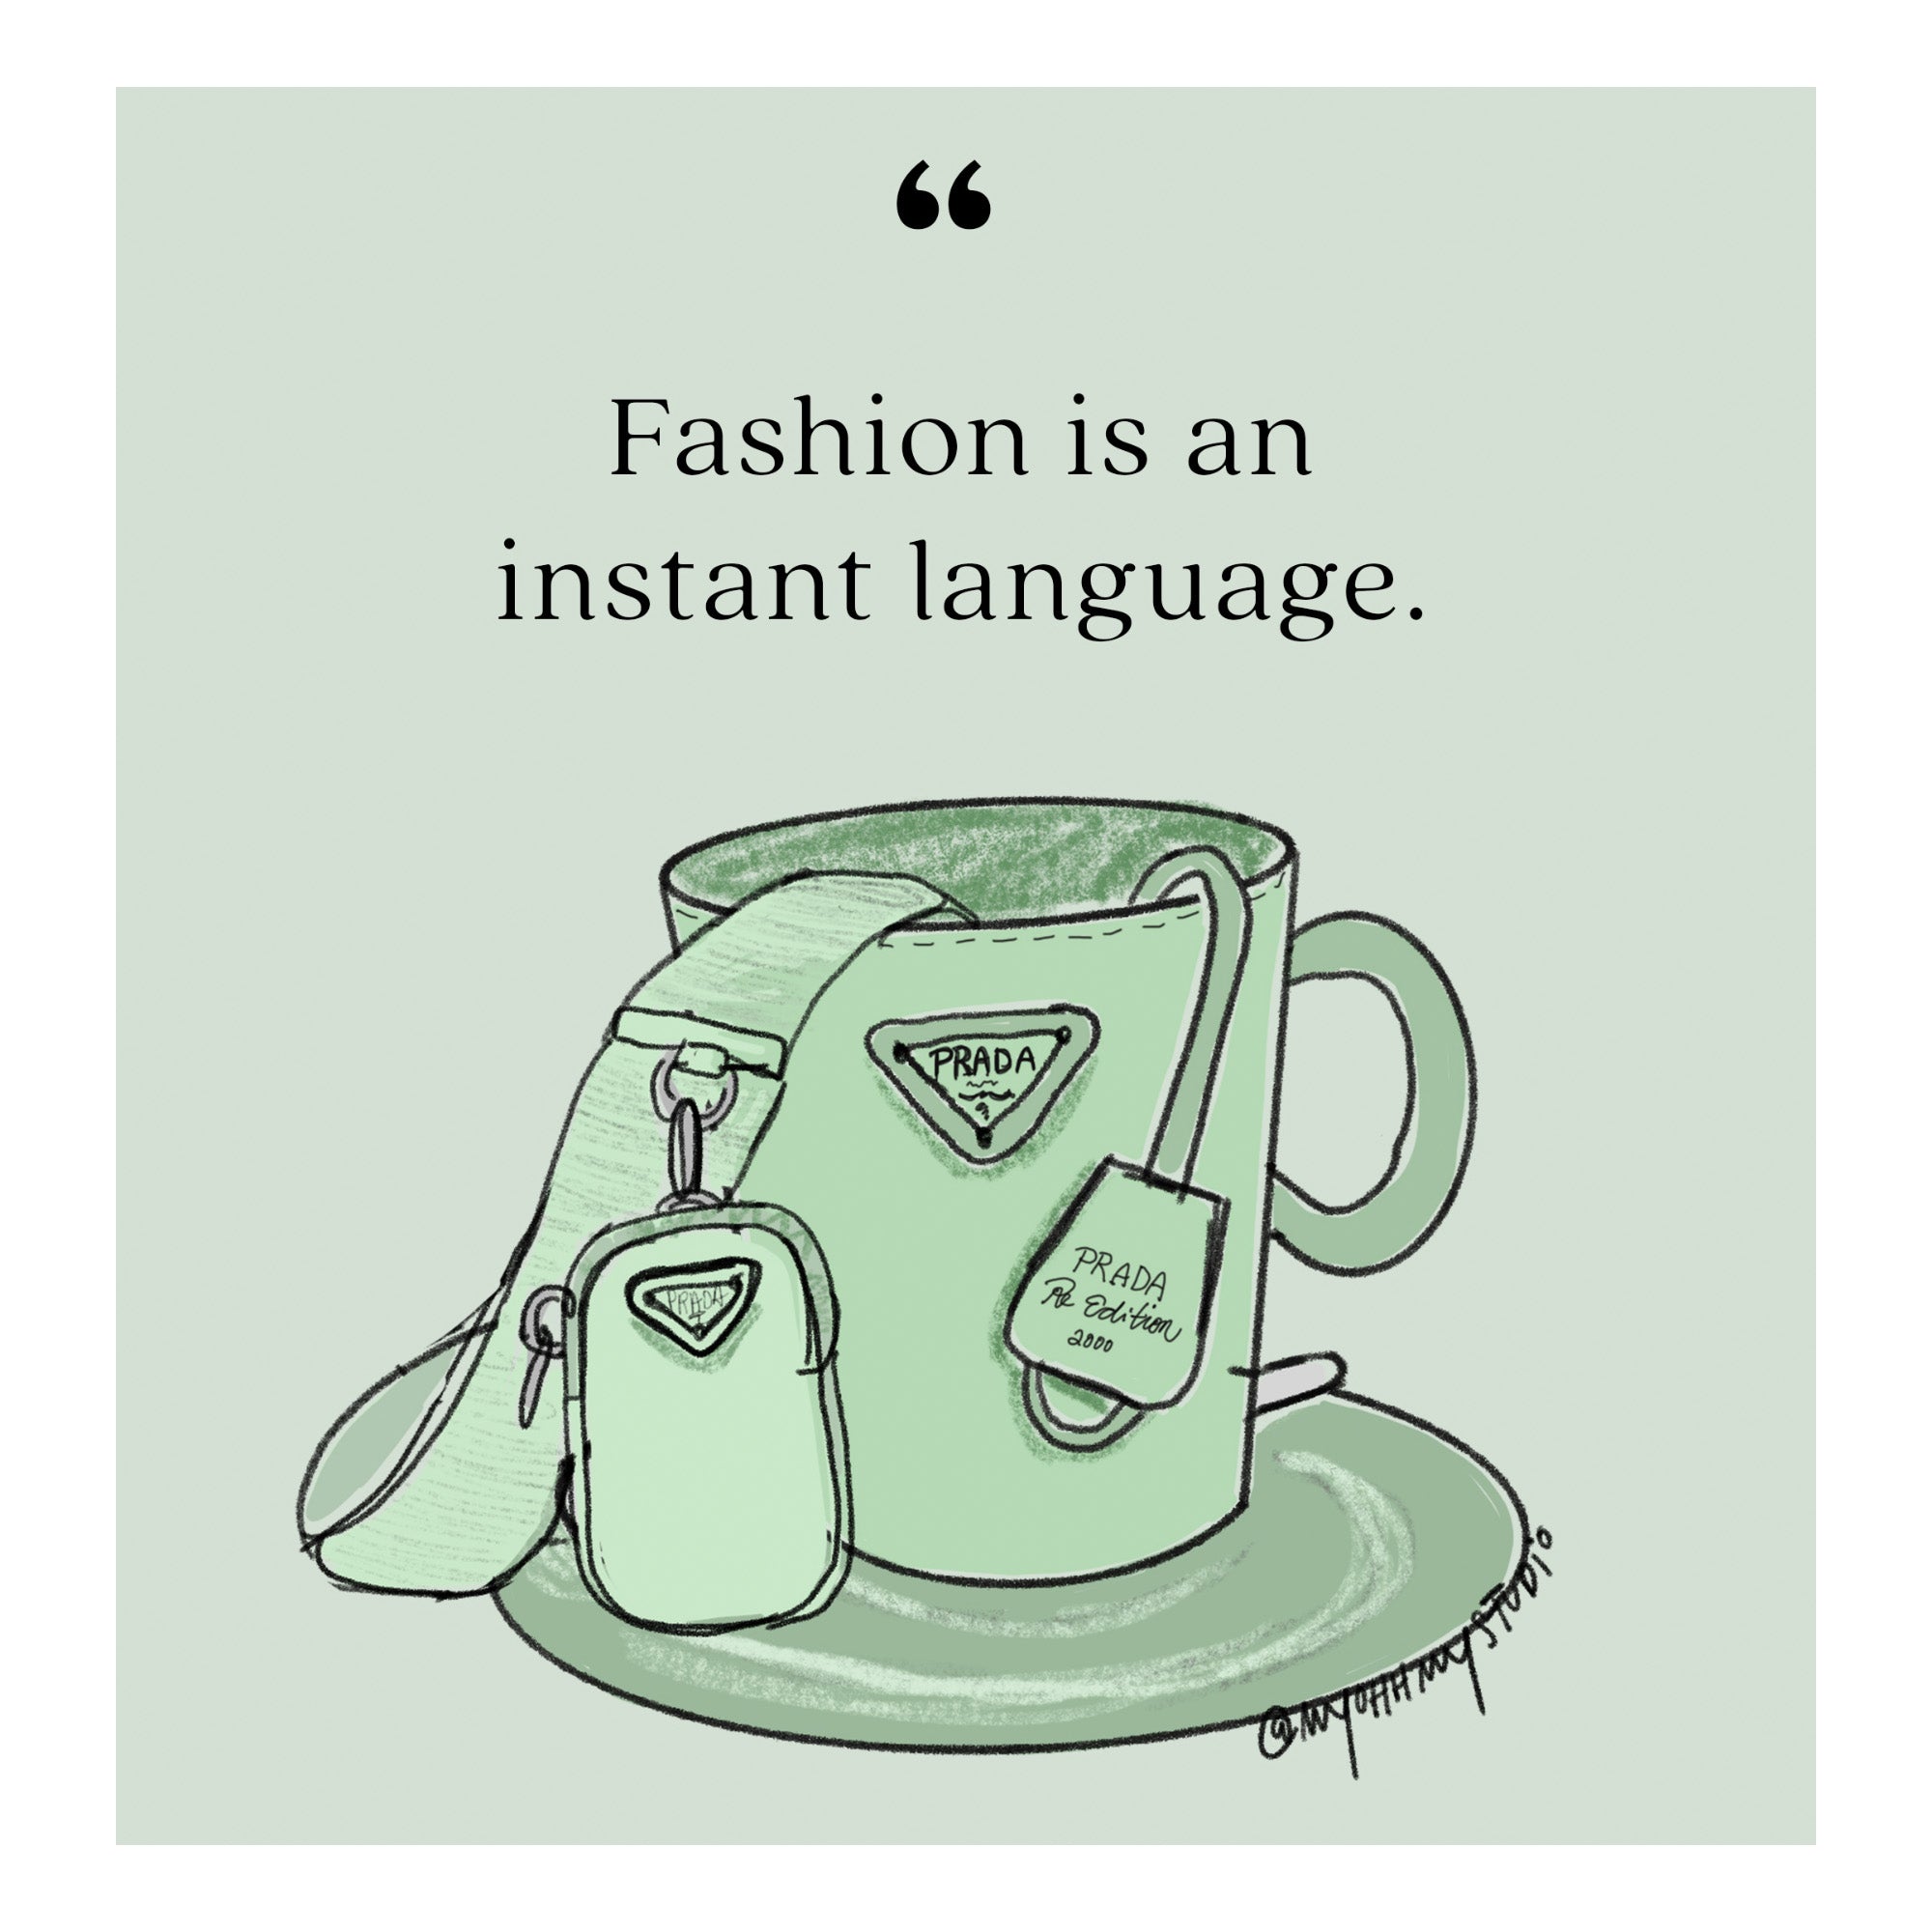 "Fashion is an instant language" Print